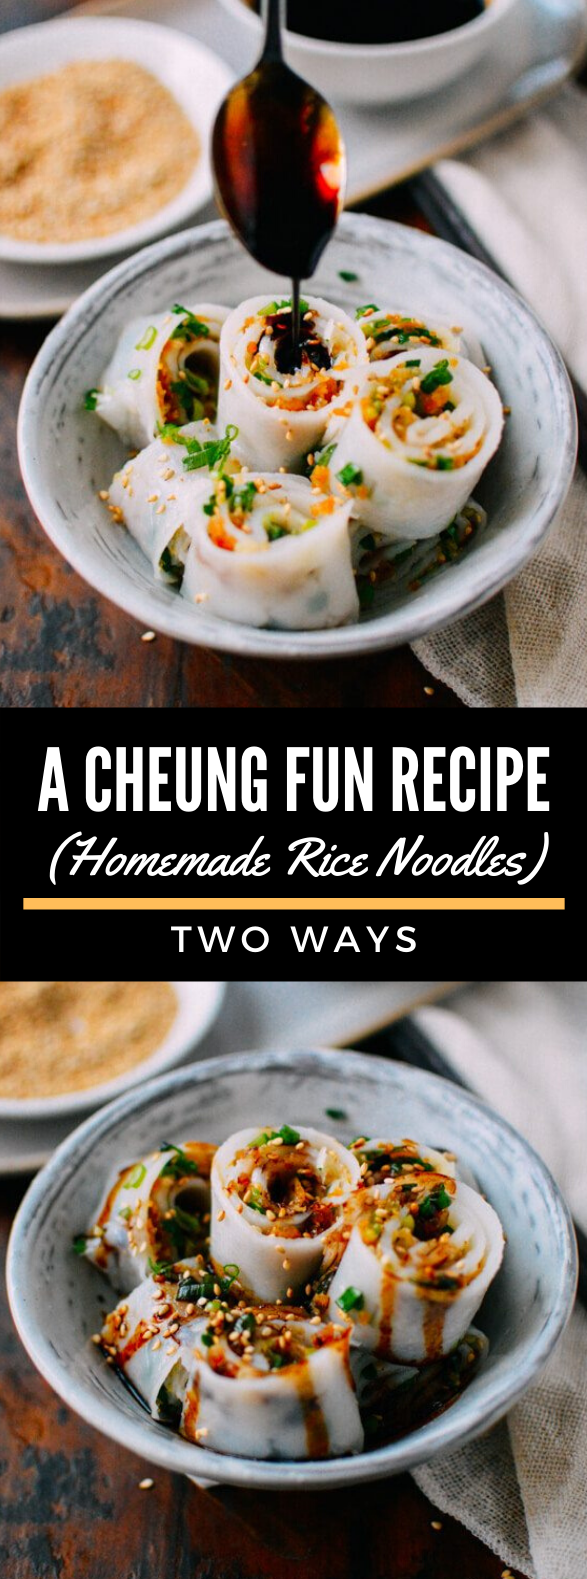 A CHEUNG FUN RECIPE (HOMEMADE RICE NOODLES), TWO WAYS #dinner #lunch